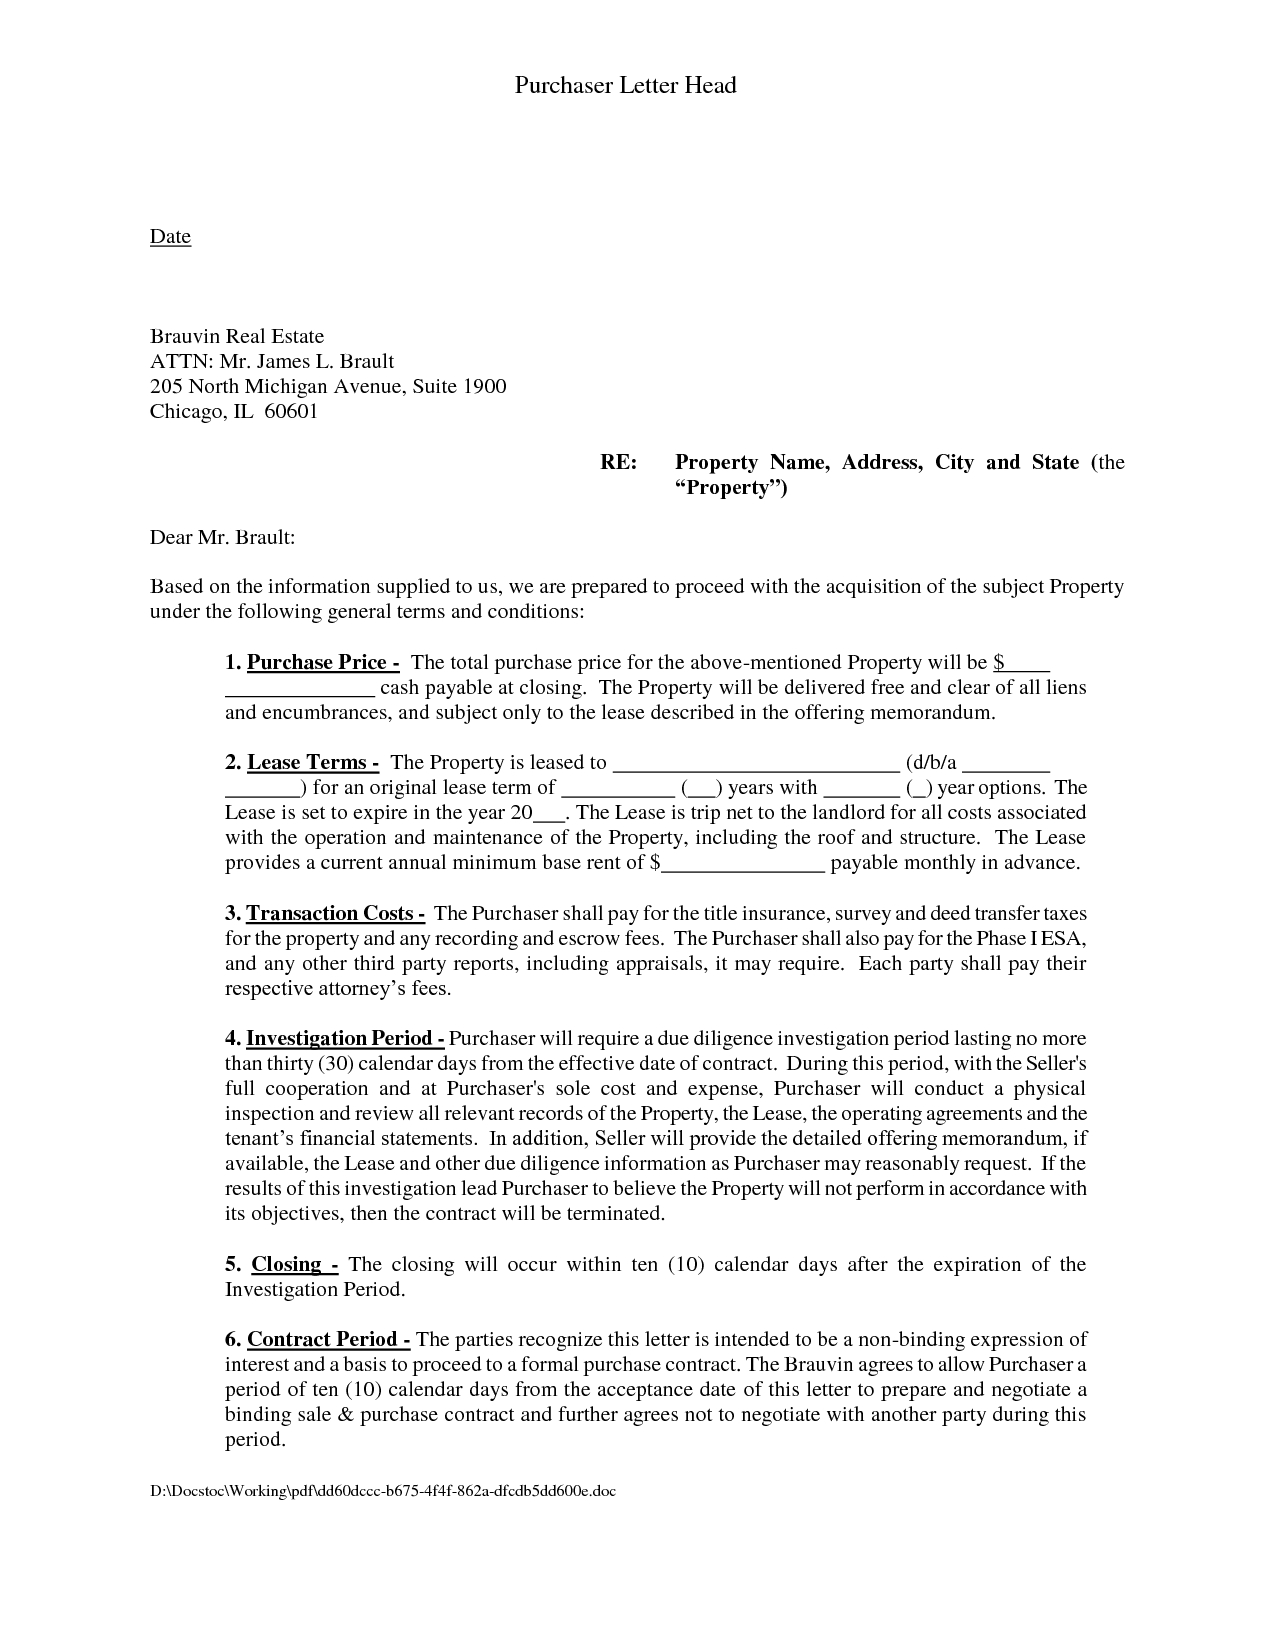 Free Real Estate Letter Of Intent Template - Mercial Letter Intent Template to Lease Space Real Estate